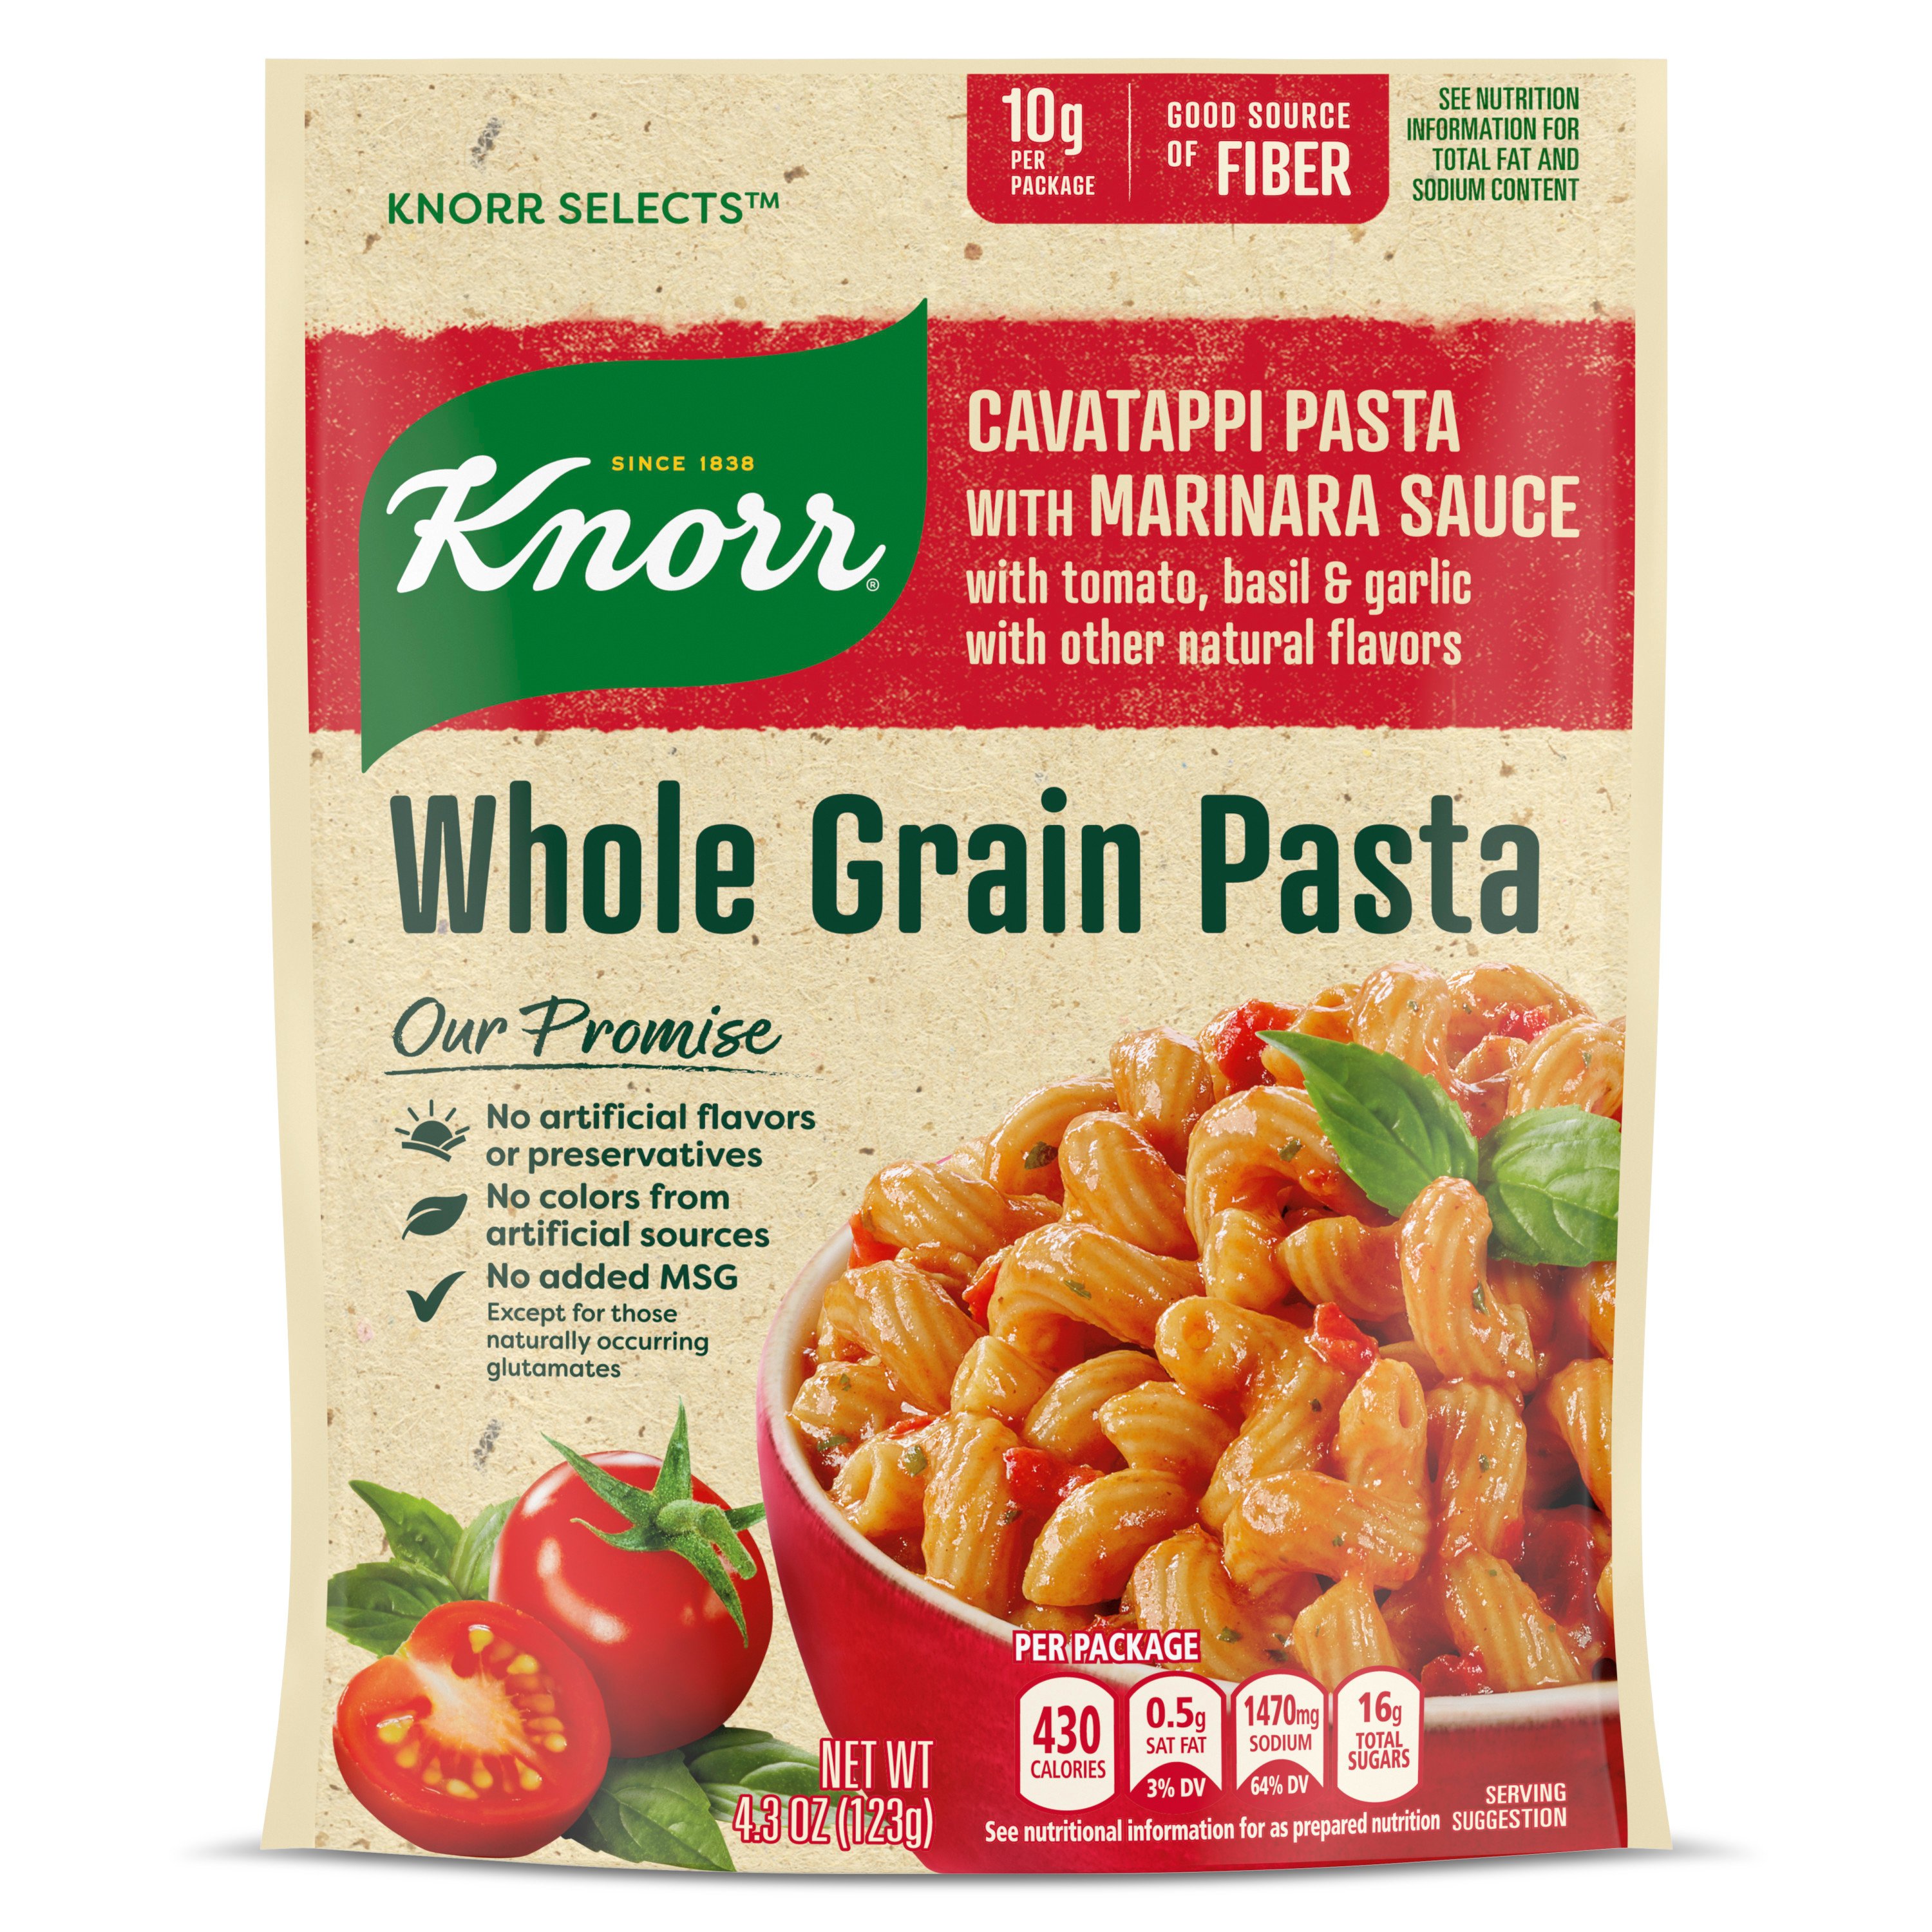 Download Knorr Selects Cavatappi with Marinara Sauce Whole Grain Pasta - Shop Pantry Meals at H-E-B